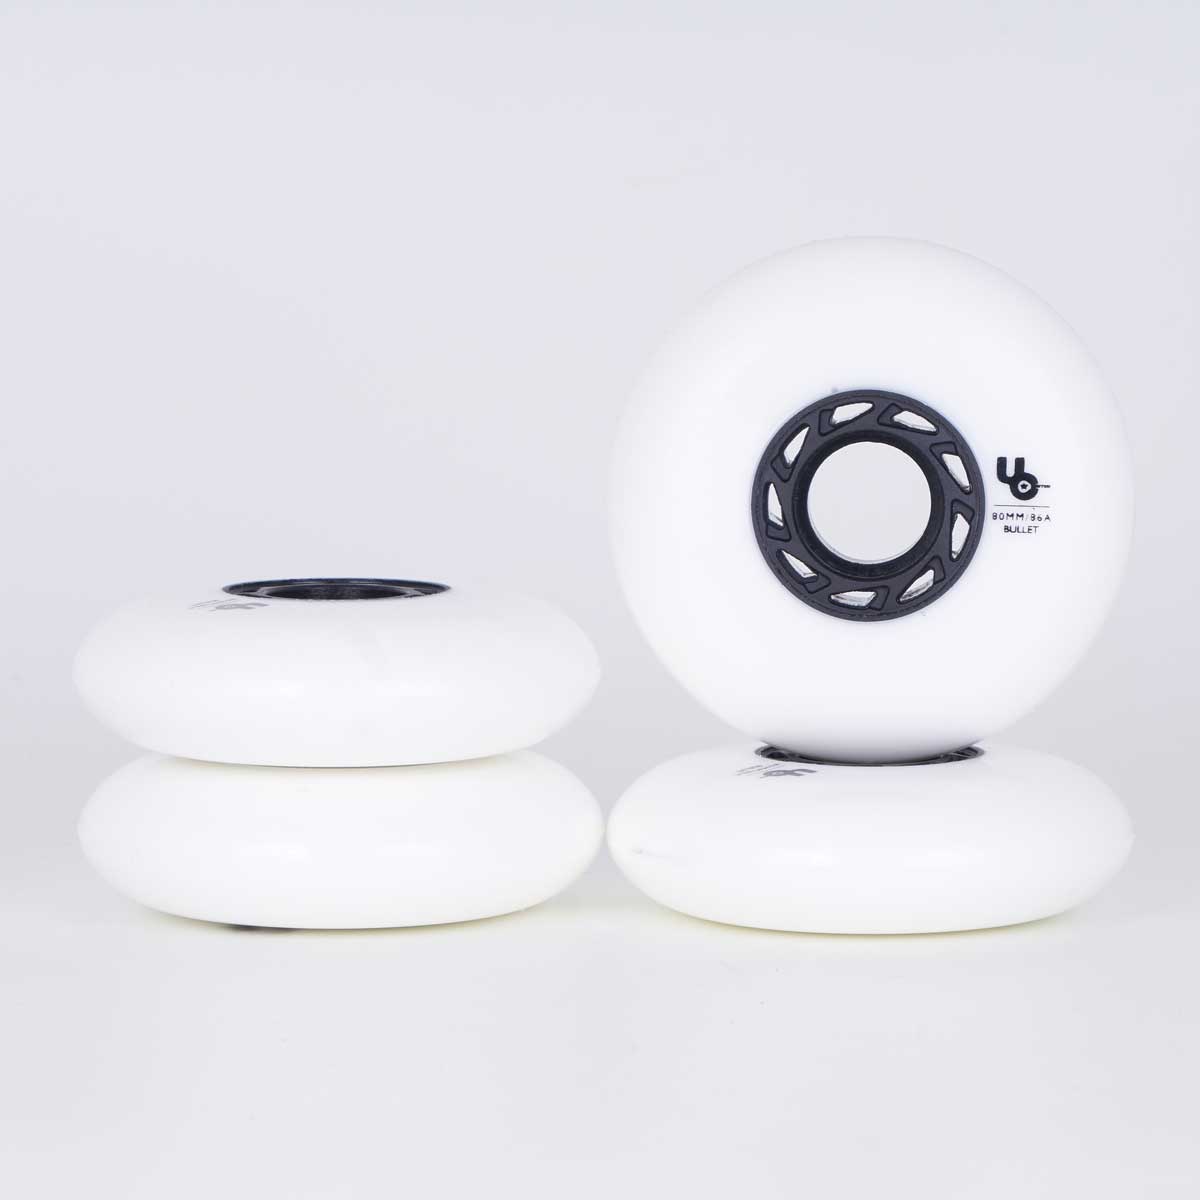 Undercover Team Wheels - set of 4 - 80mm-Undercover Wheels-80mm,atcUpsellCol:upsellwheels,white